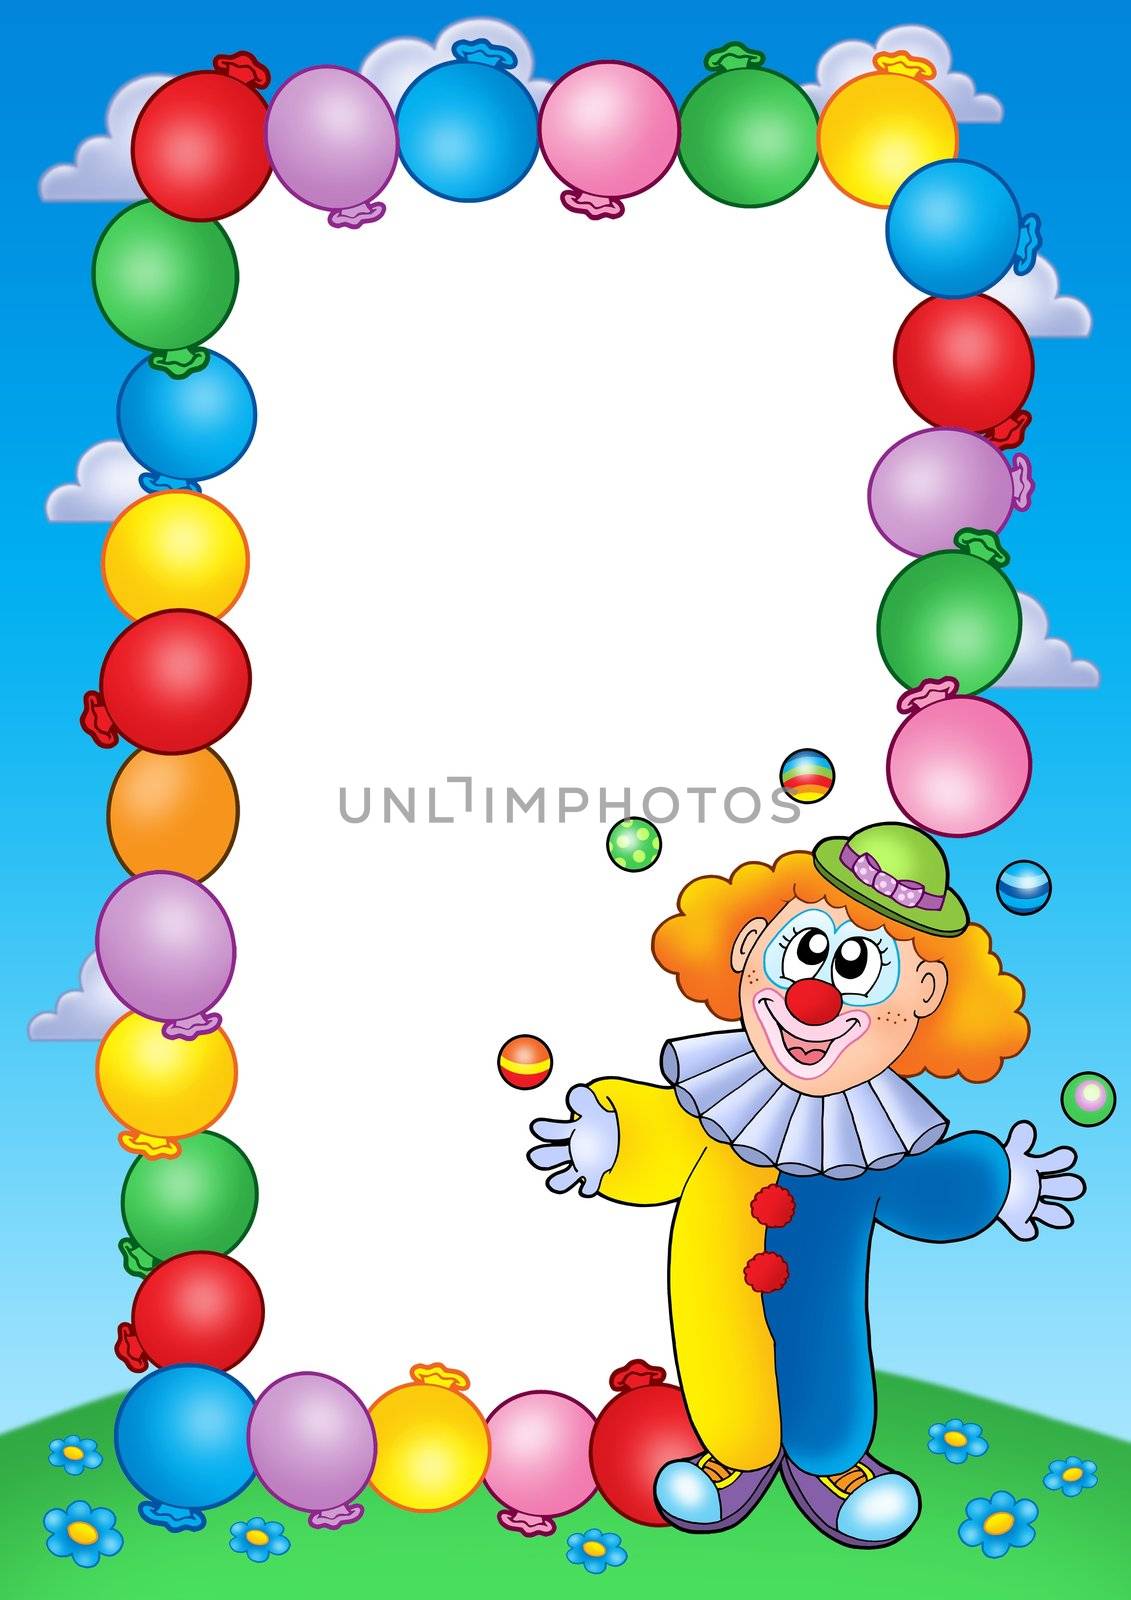 Party invitation frame with clown 4 - color illustration.